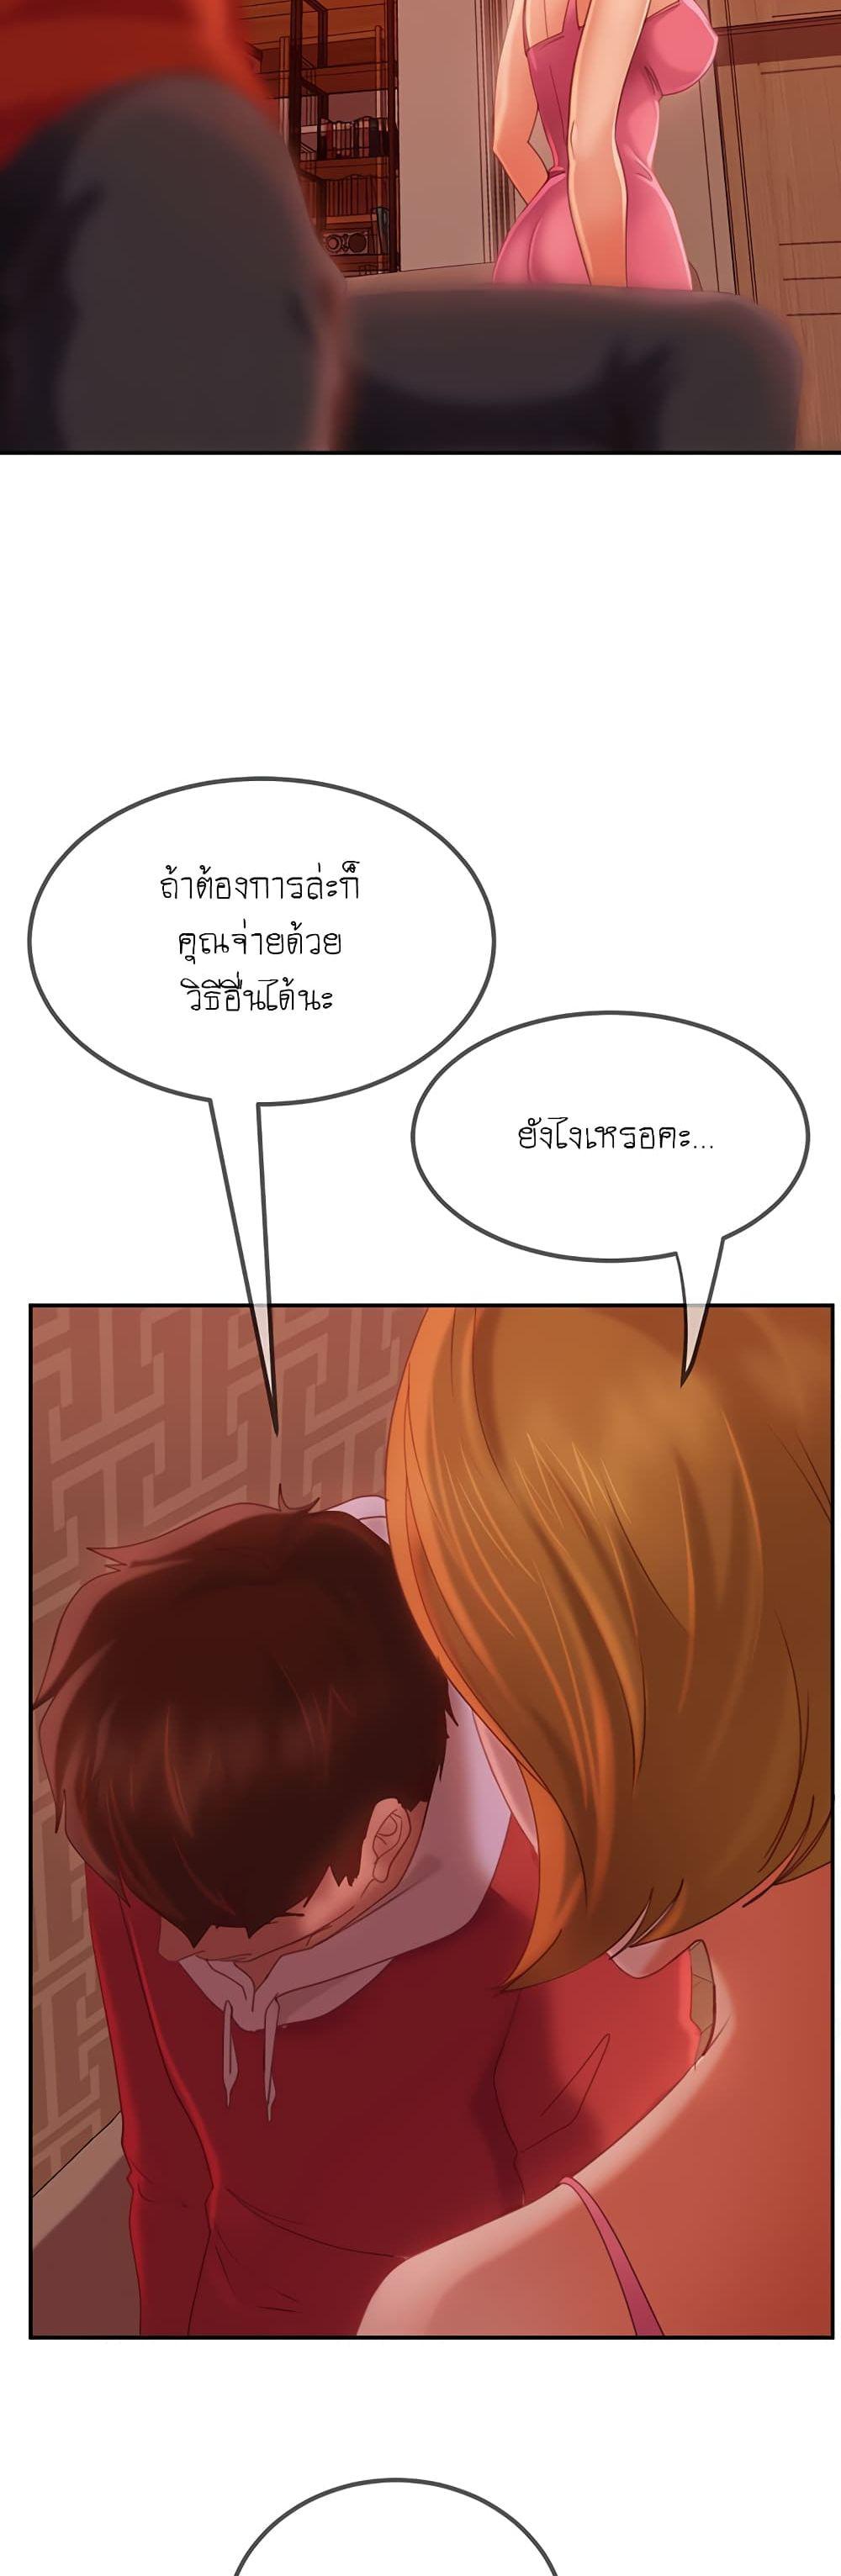 A Twisted Day 4 ภาพ 39